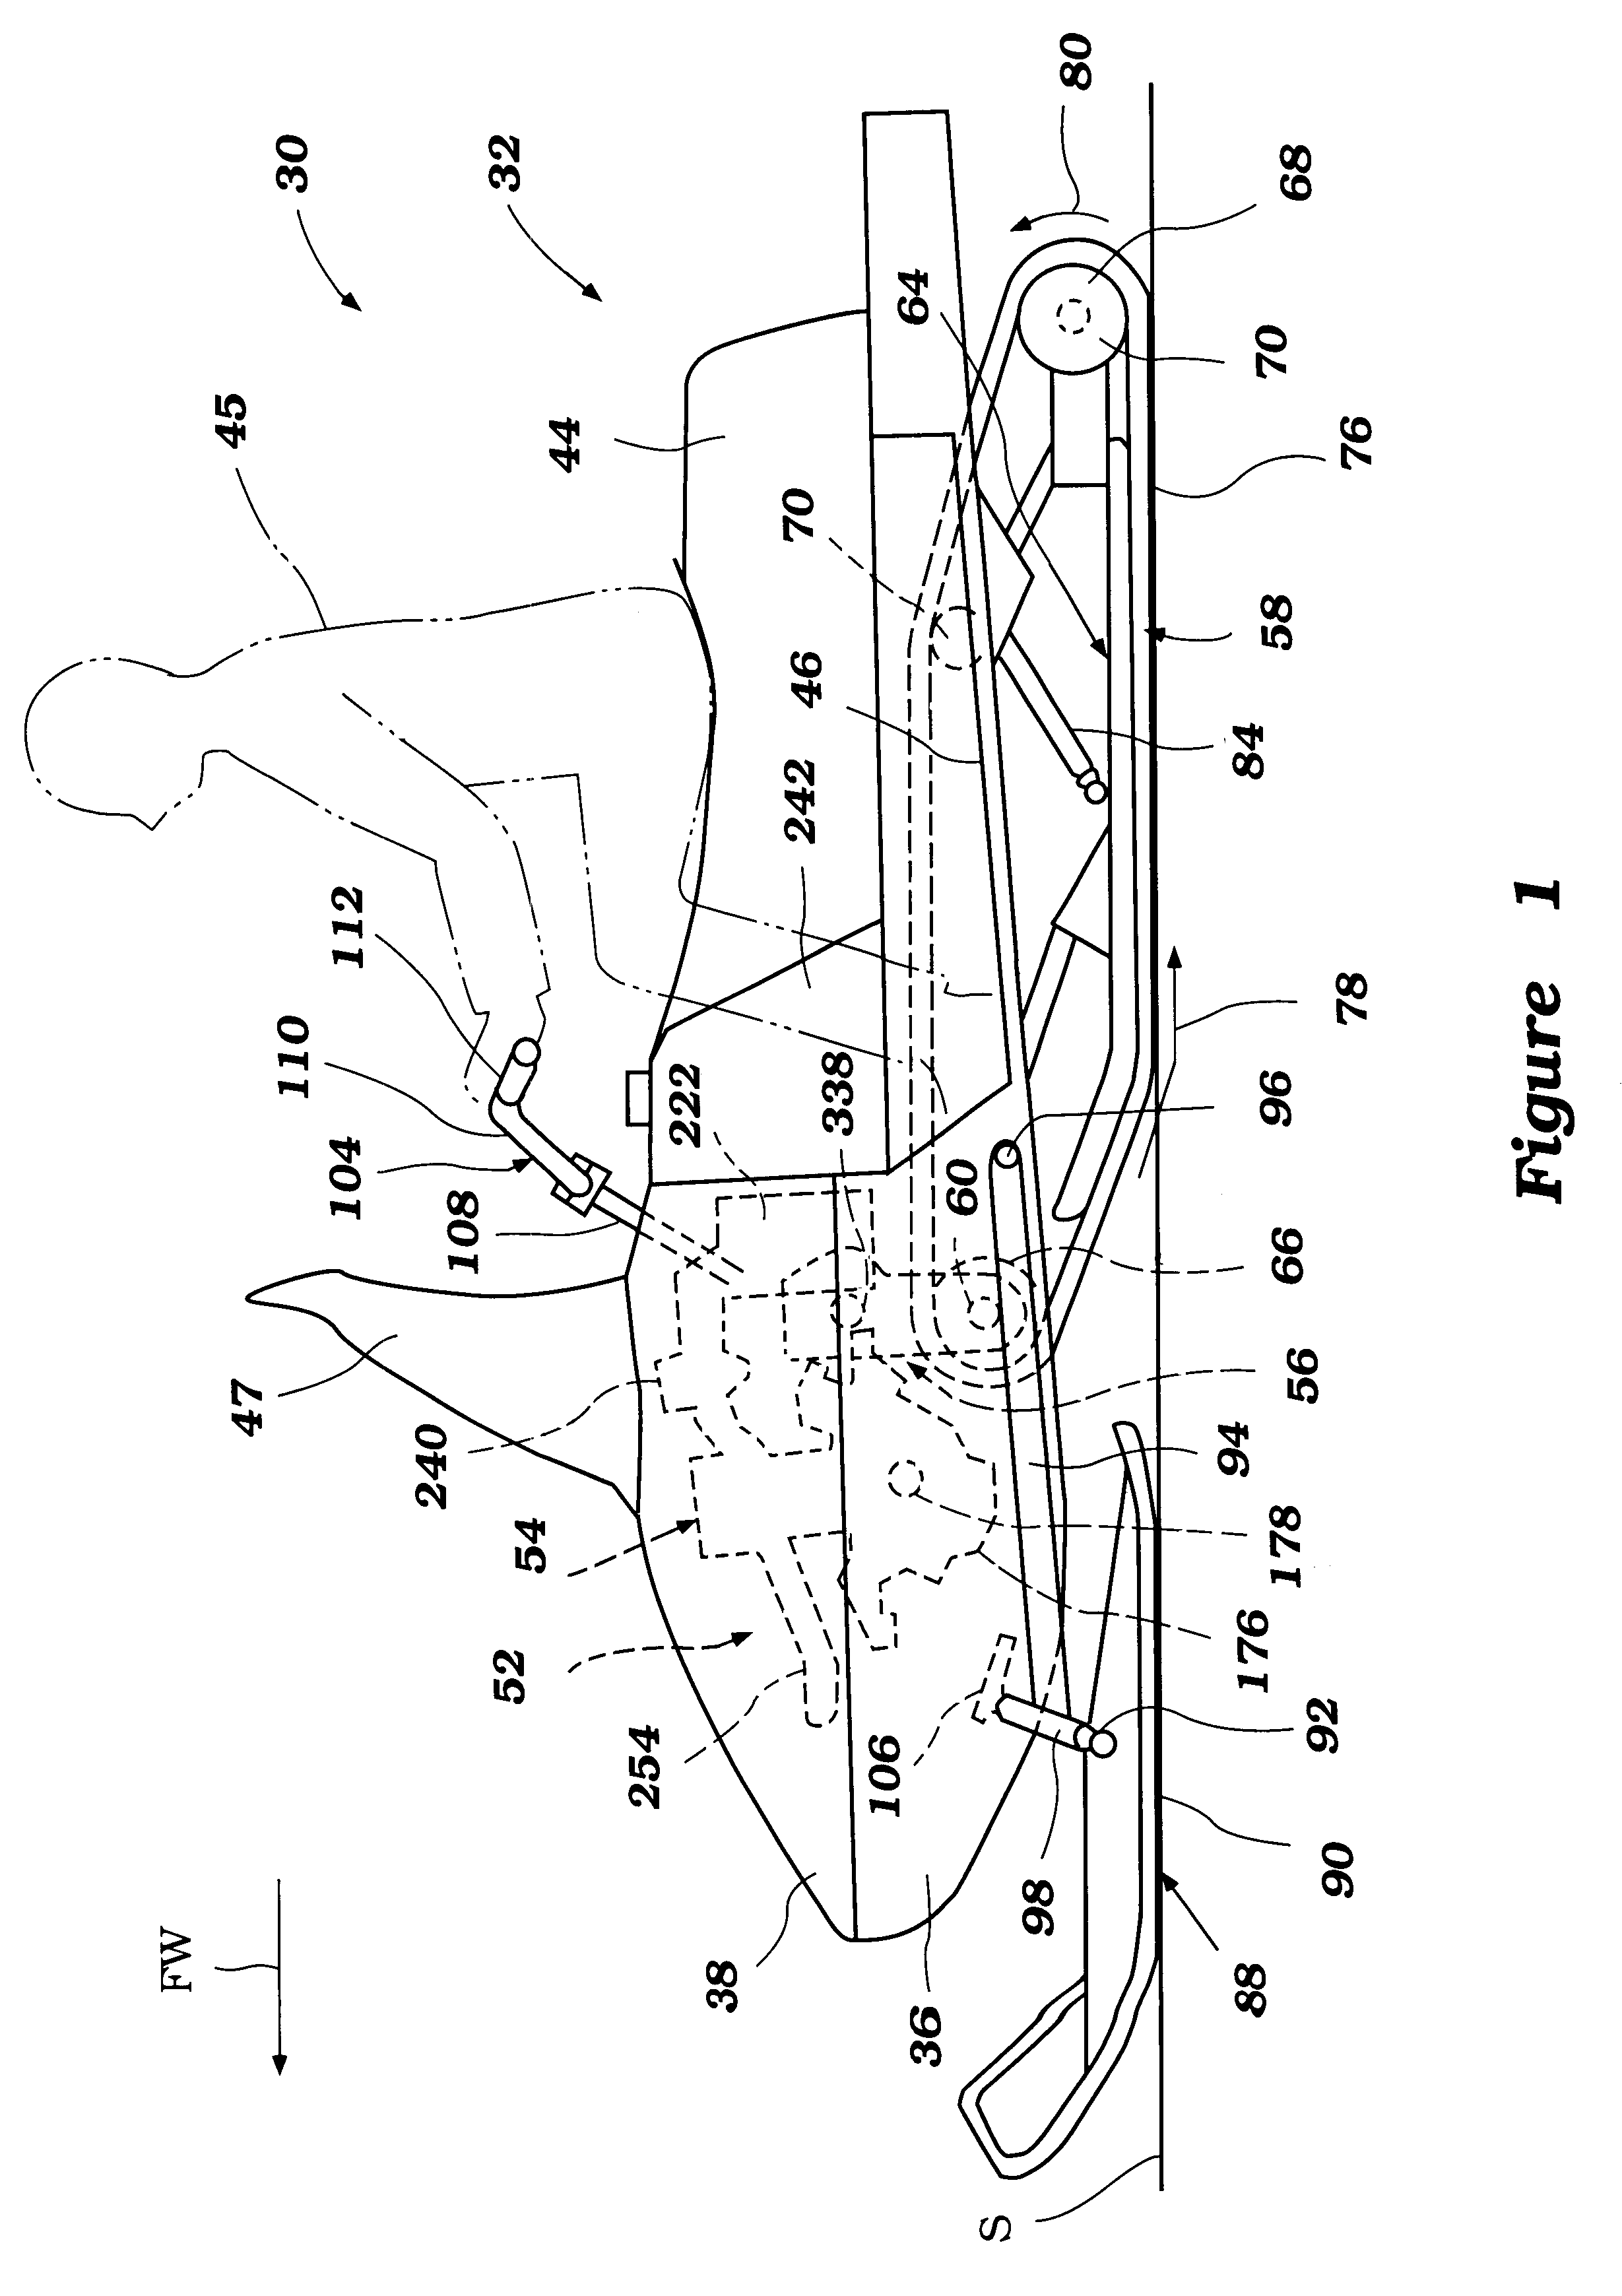 Cooling system for land vehicles